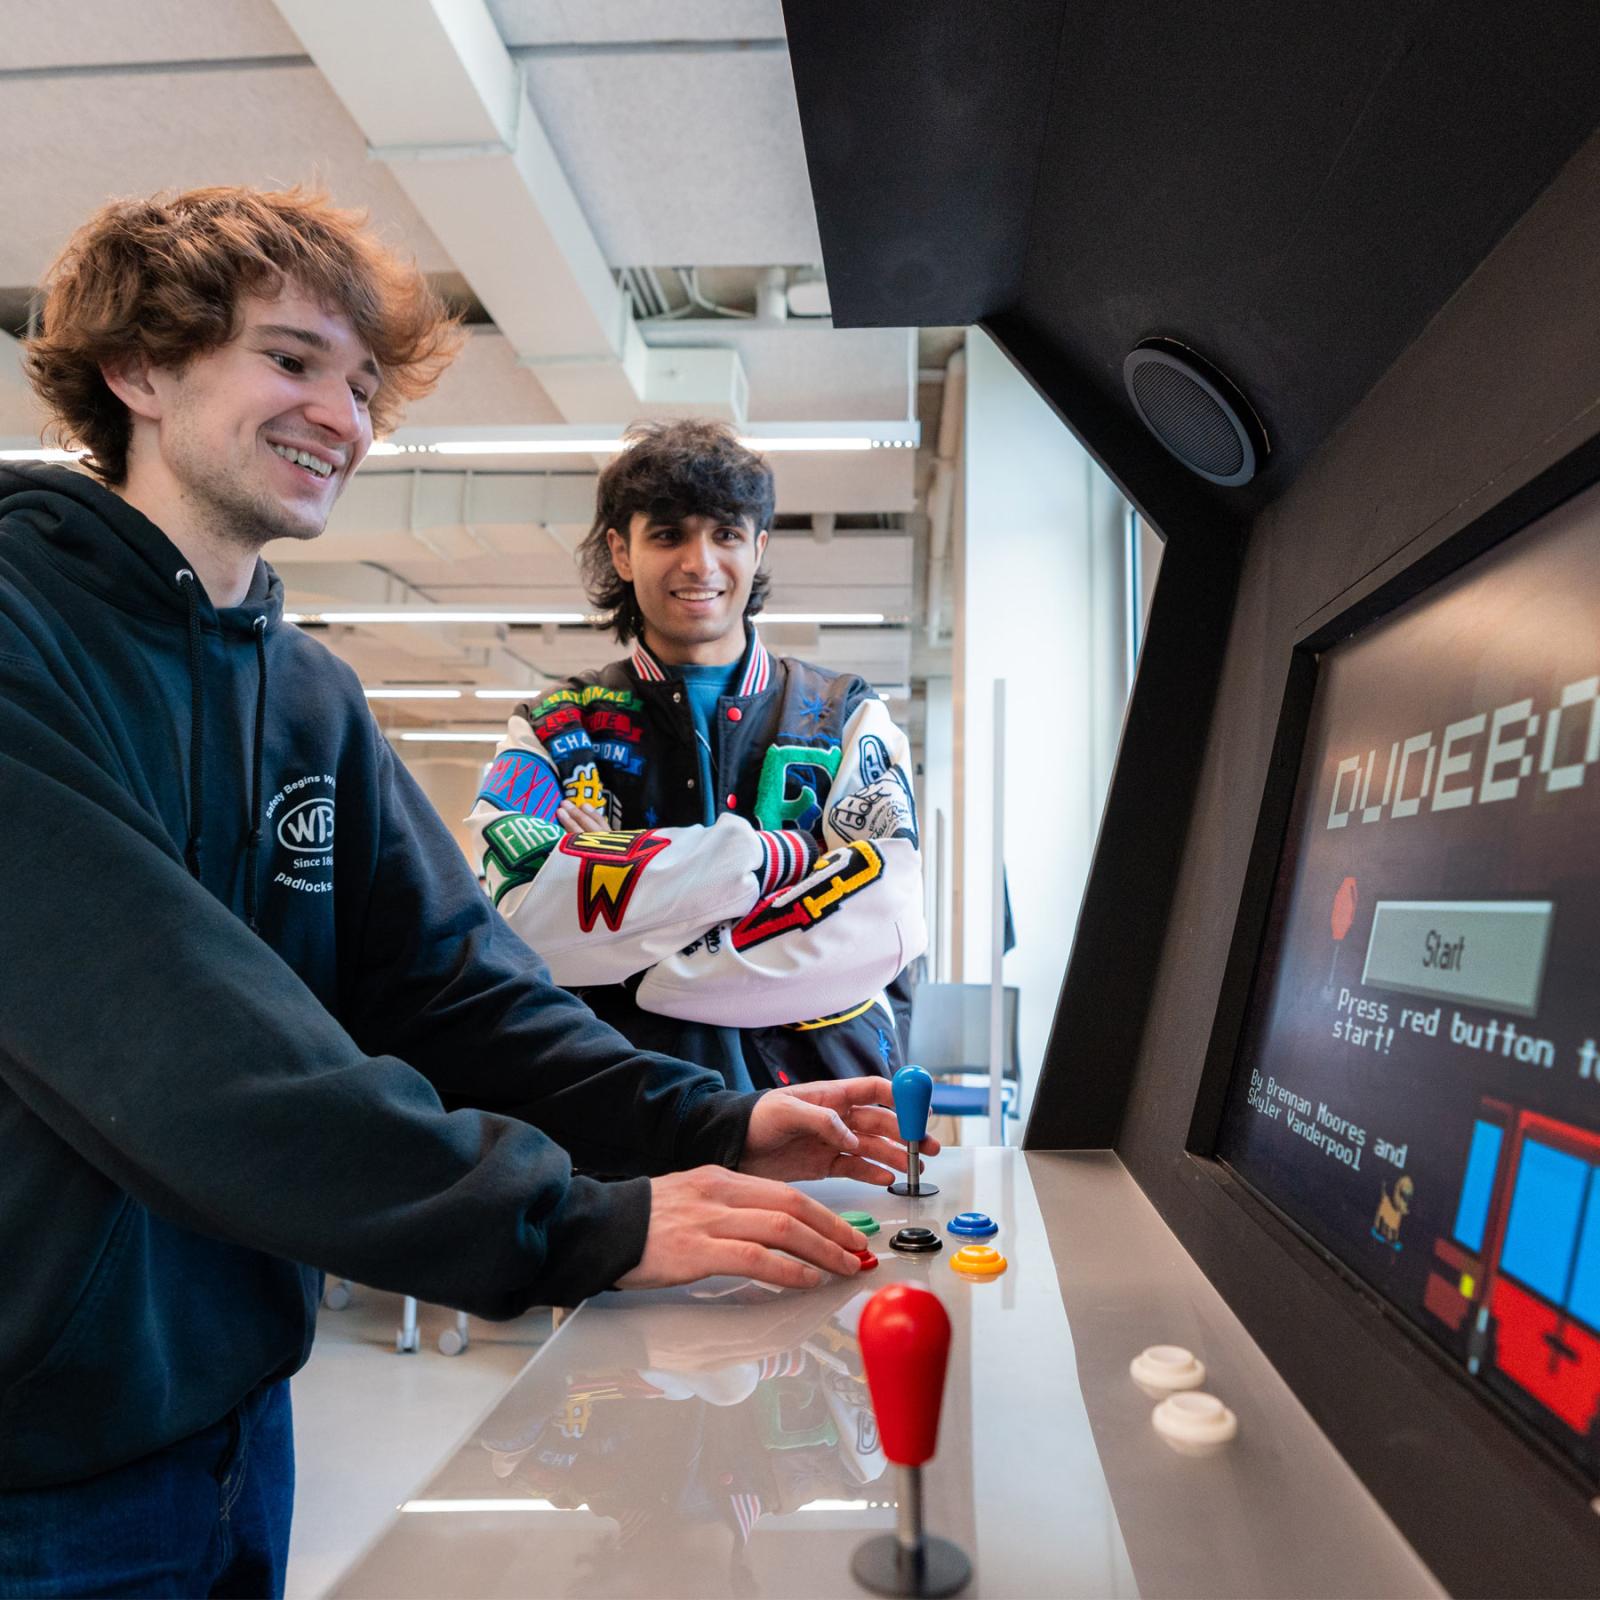 Pace students playing on a homemade arcade machine. 